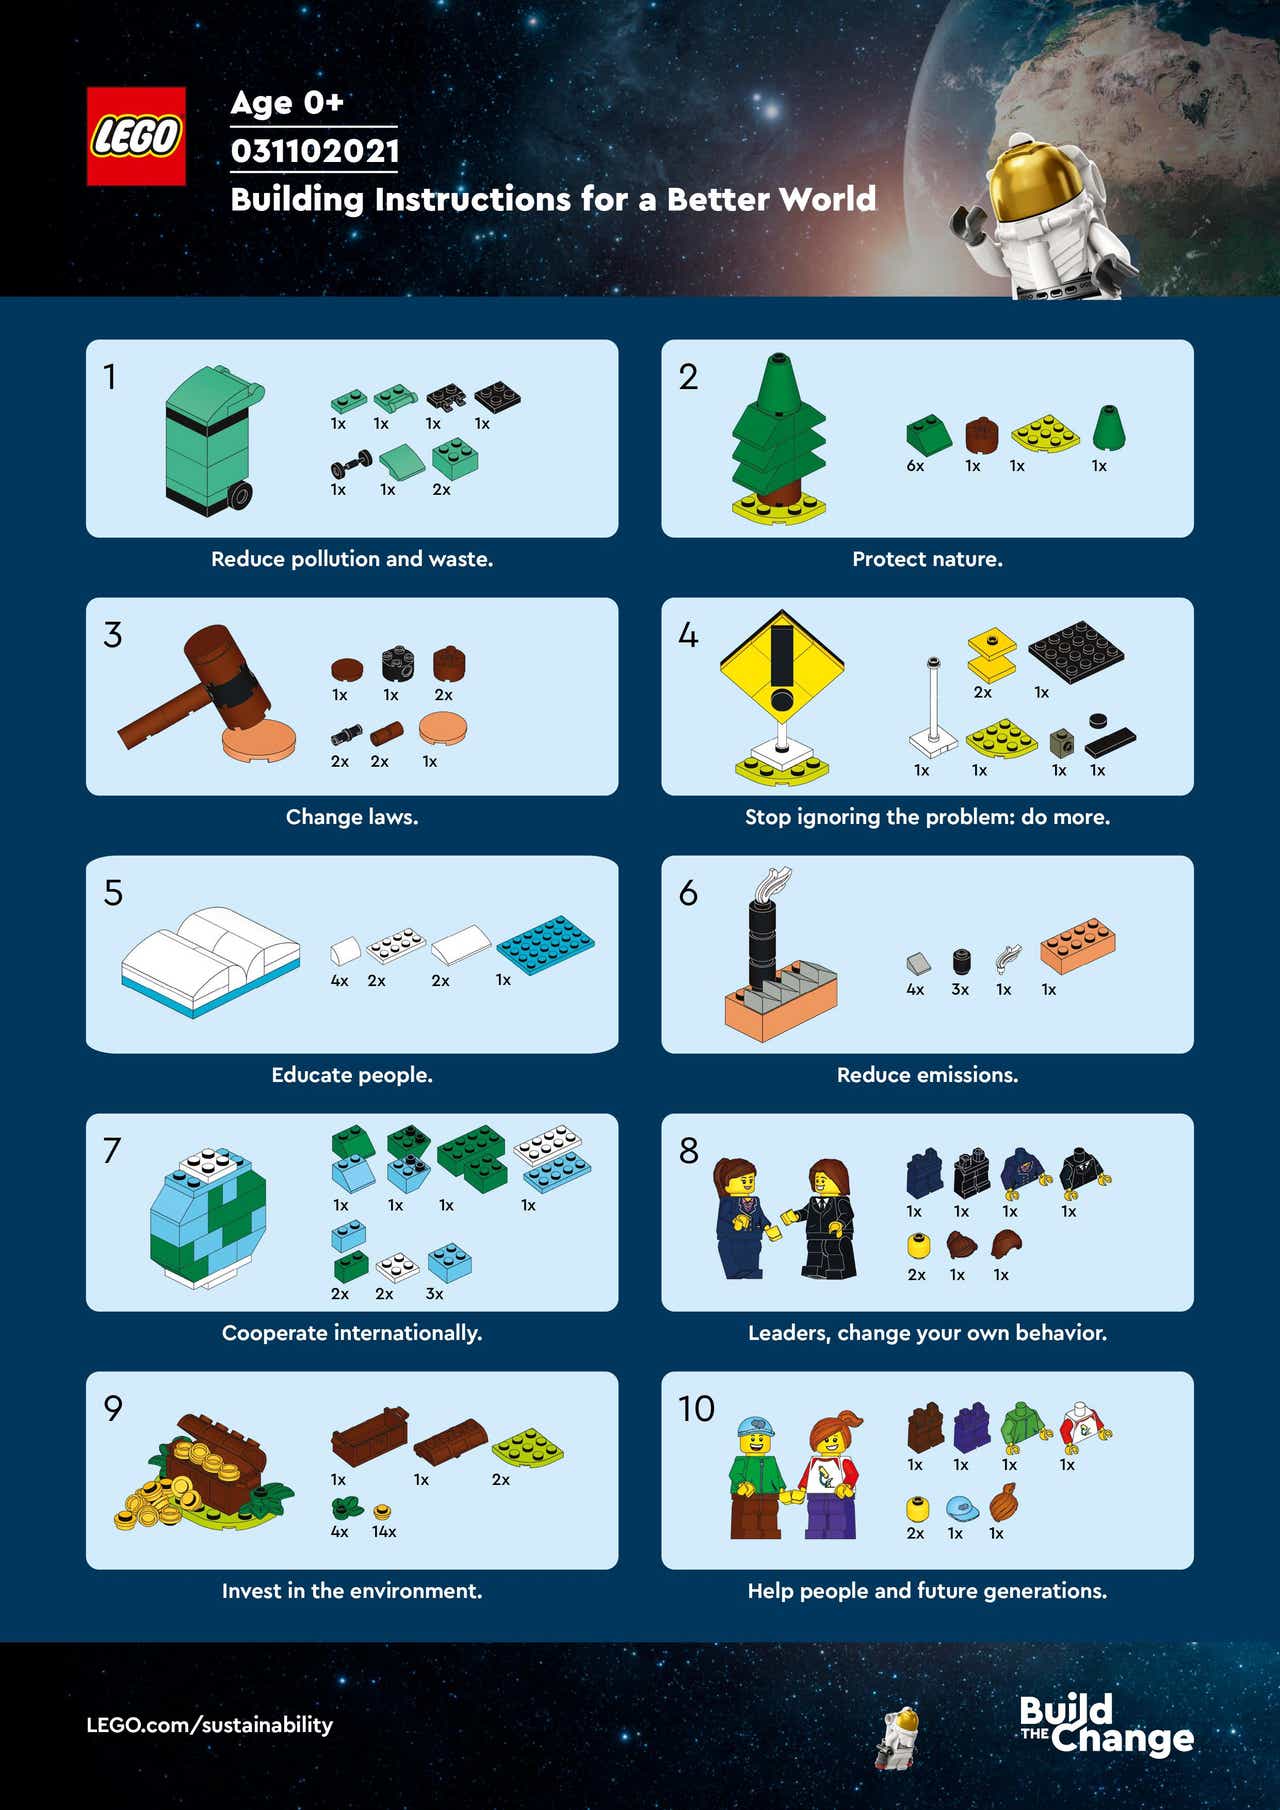 LEGO Building Instructions for a Better World (031102021) COP26 - The Brick Fan